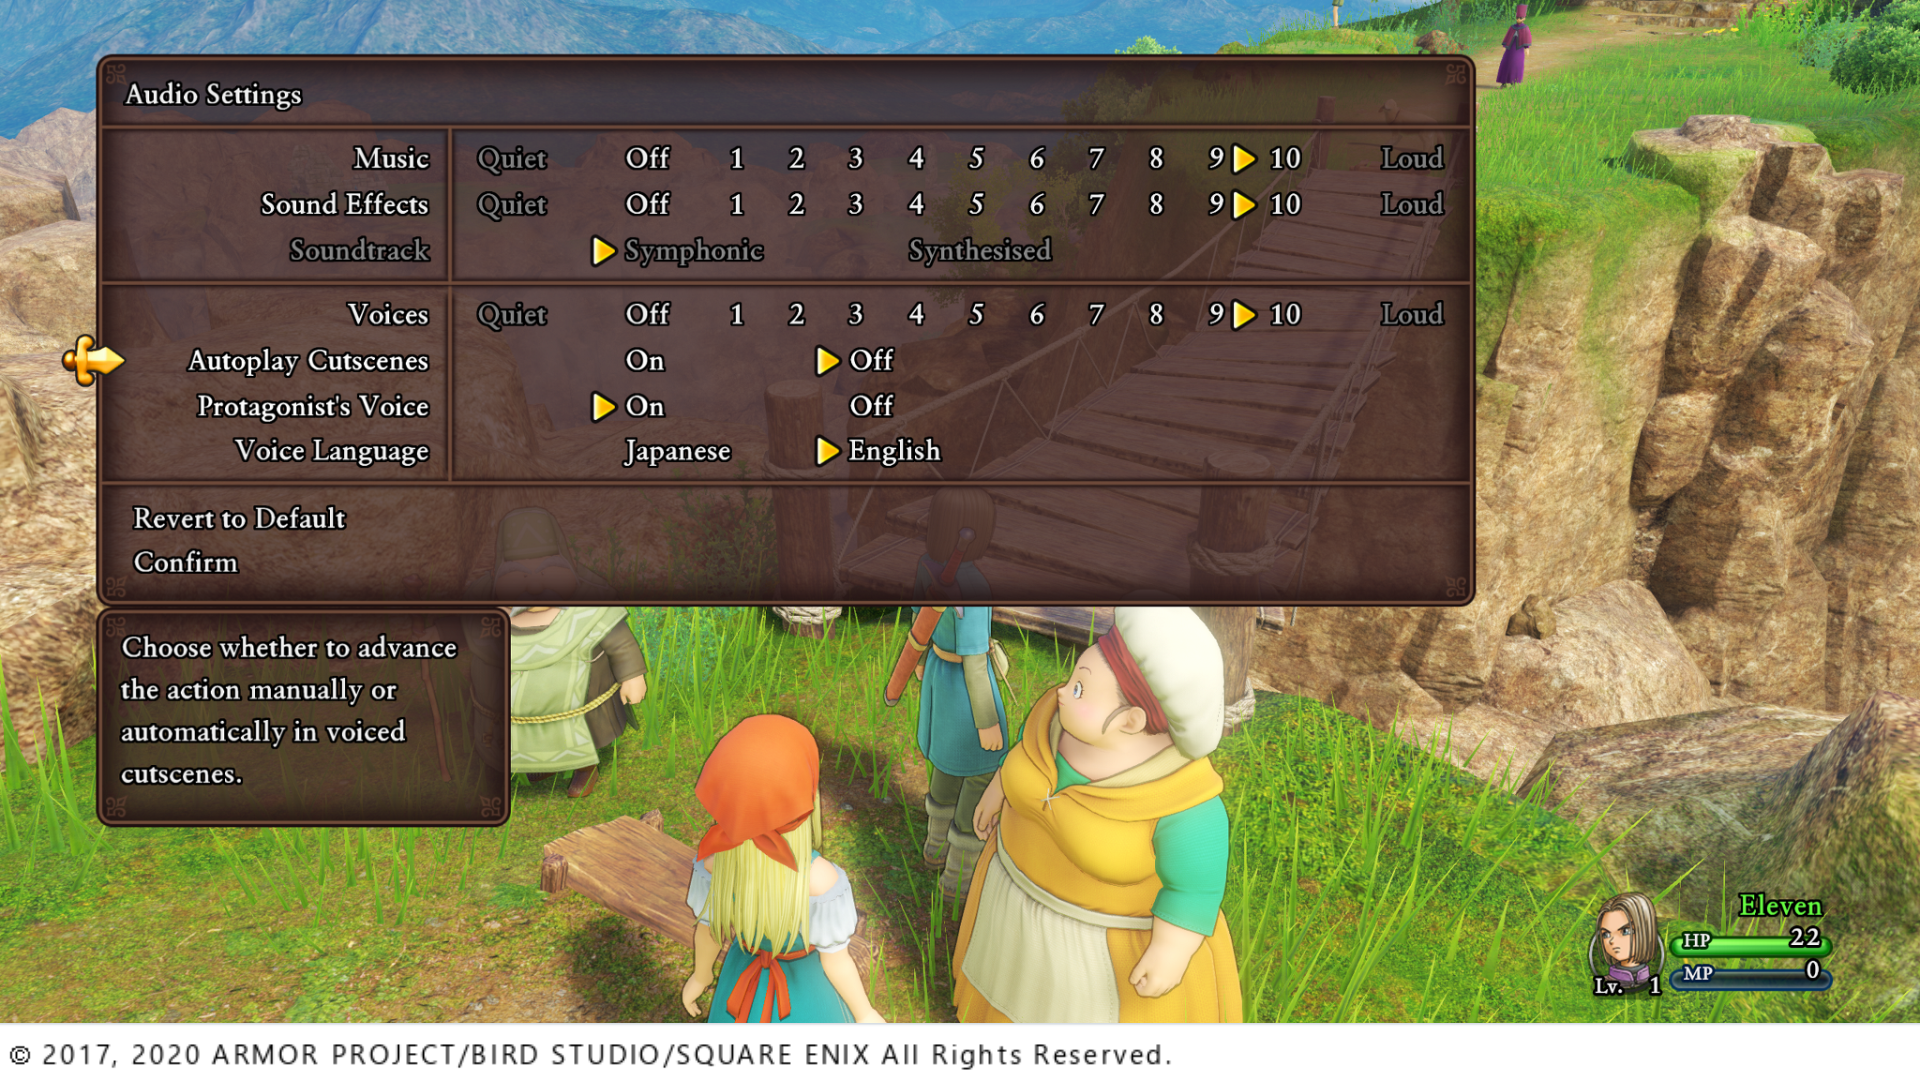 Dragon Quest XI S: Echoes of an Elusive Age screen shot of Audio Settings where Autoplay Cutscenes setting is set to Off.  Copyright on the bottom says "2017, 2020 Armor Project / Bird Studio / Square Enix All Rights Reserved.